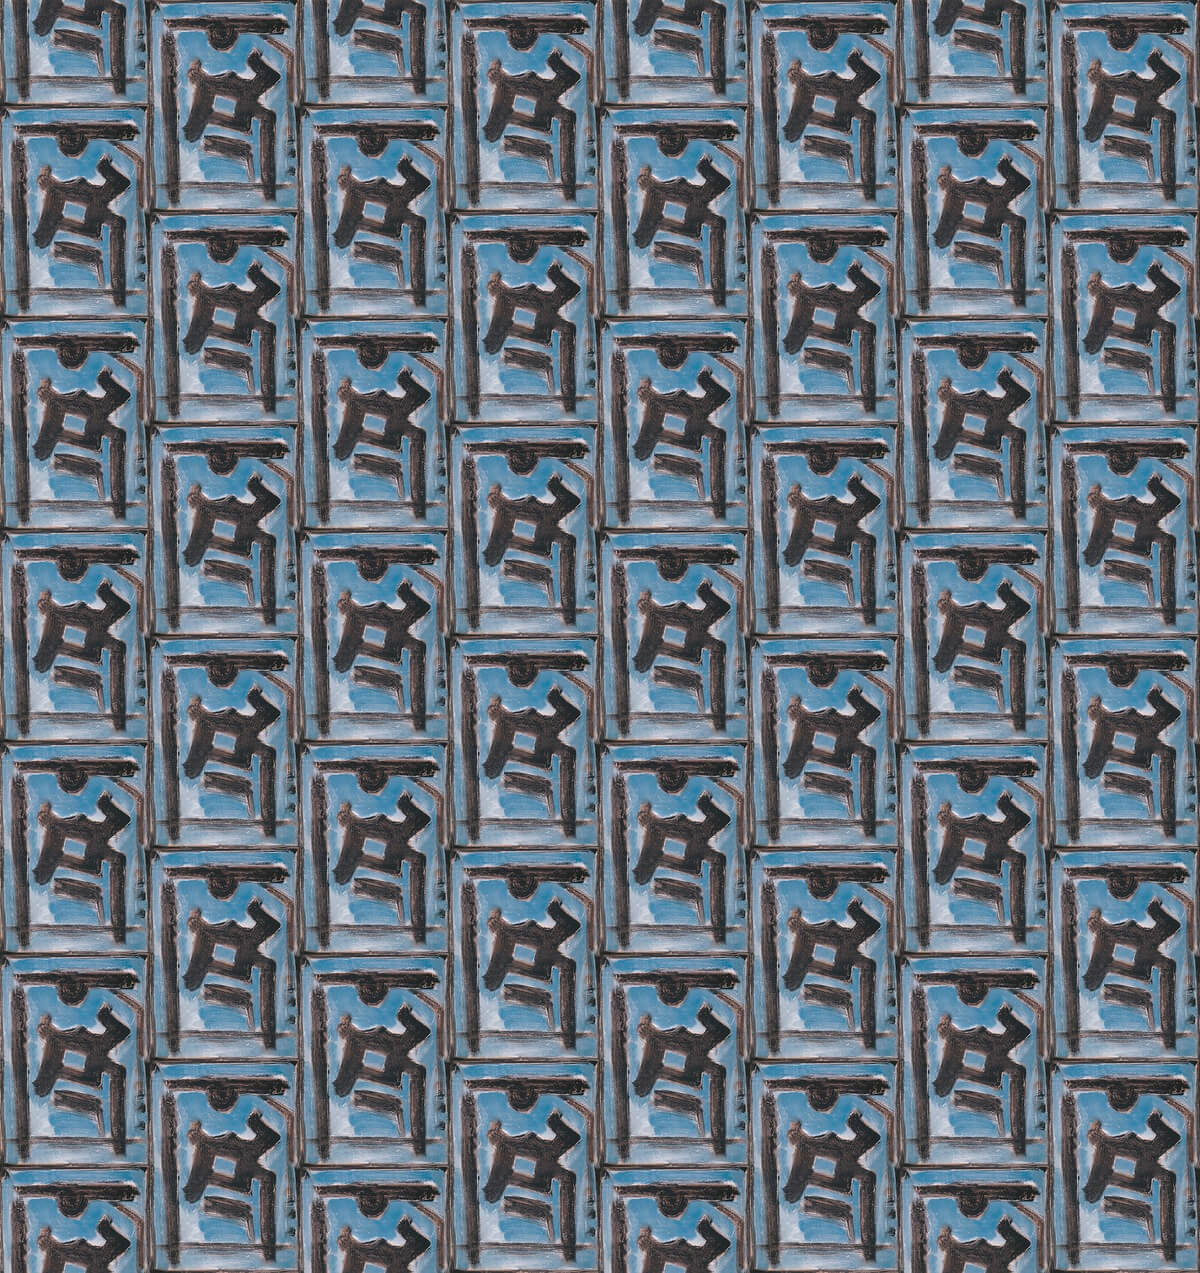 Liberated pattern in blue